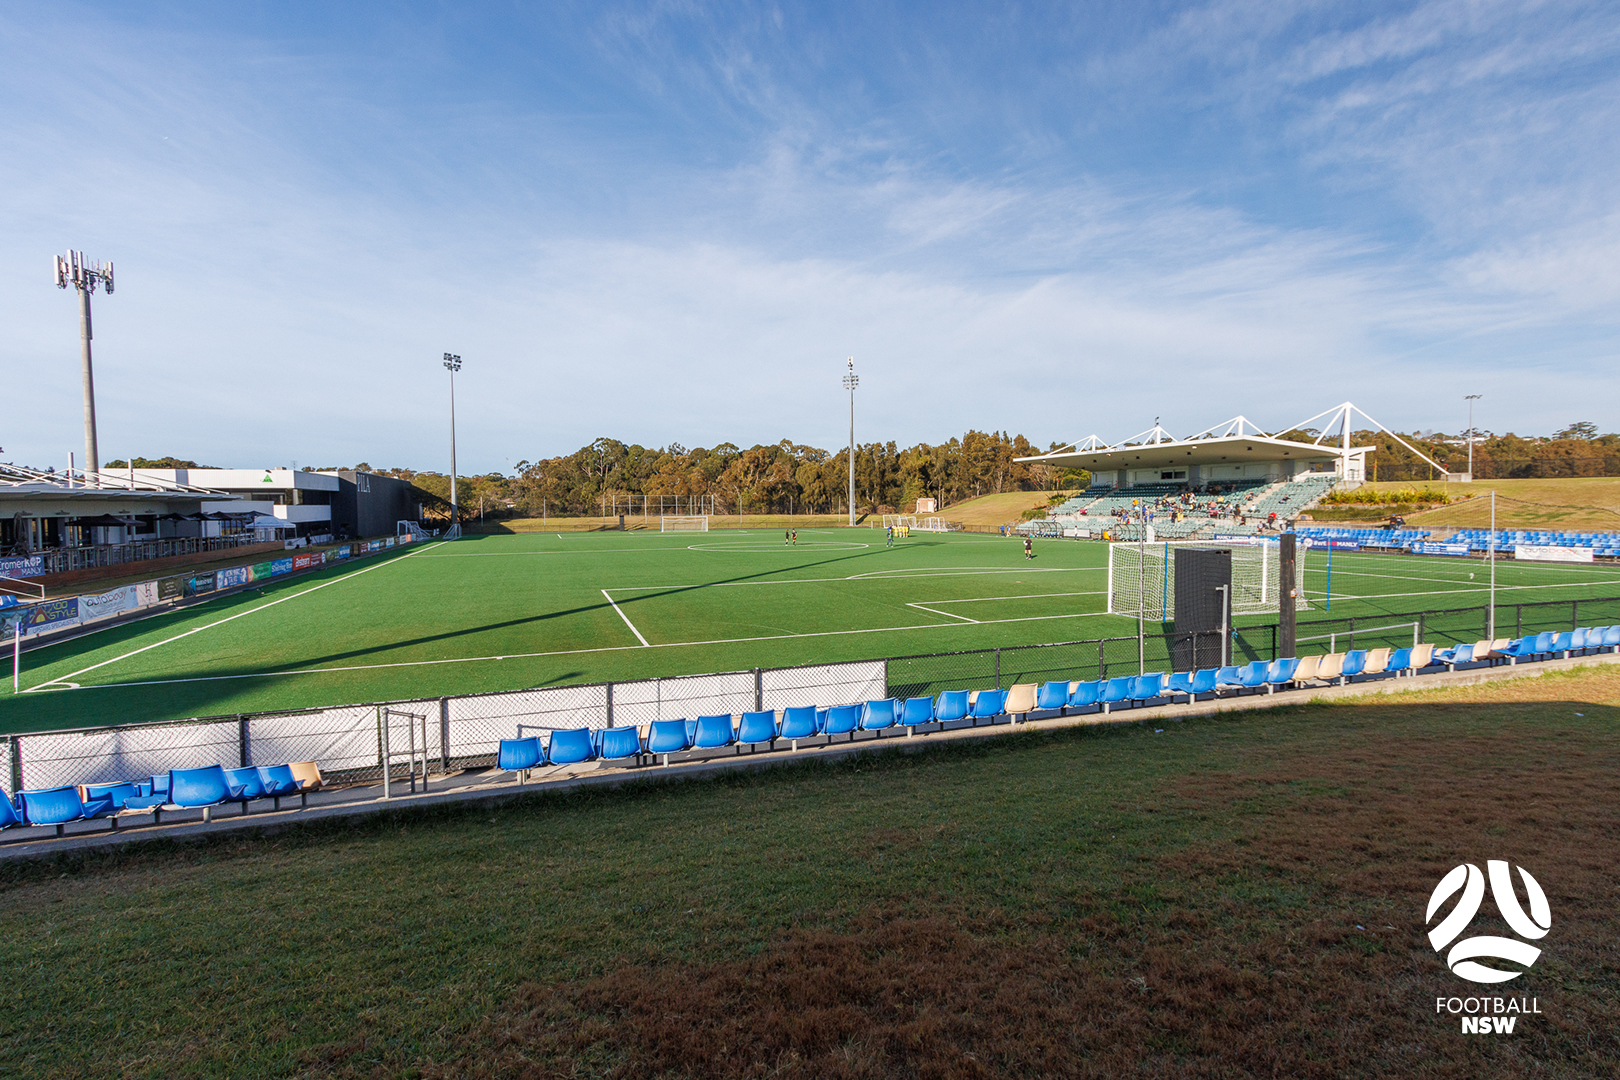 Cromer Park was the venue for the 2023 Football NSW State Cup Finals. Photo credit: Football NSW